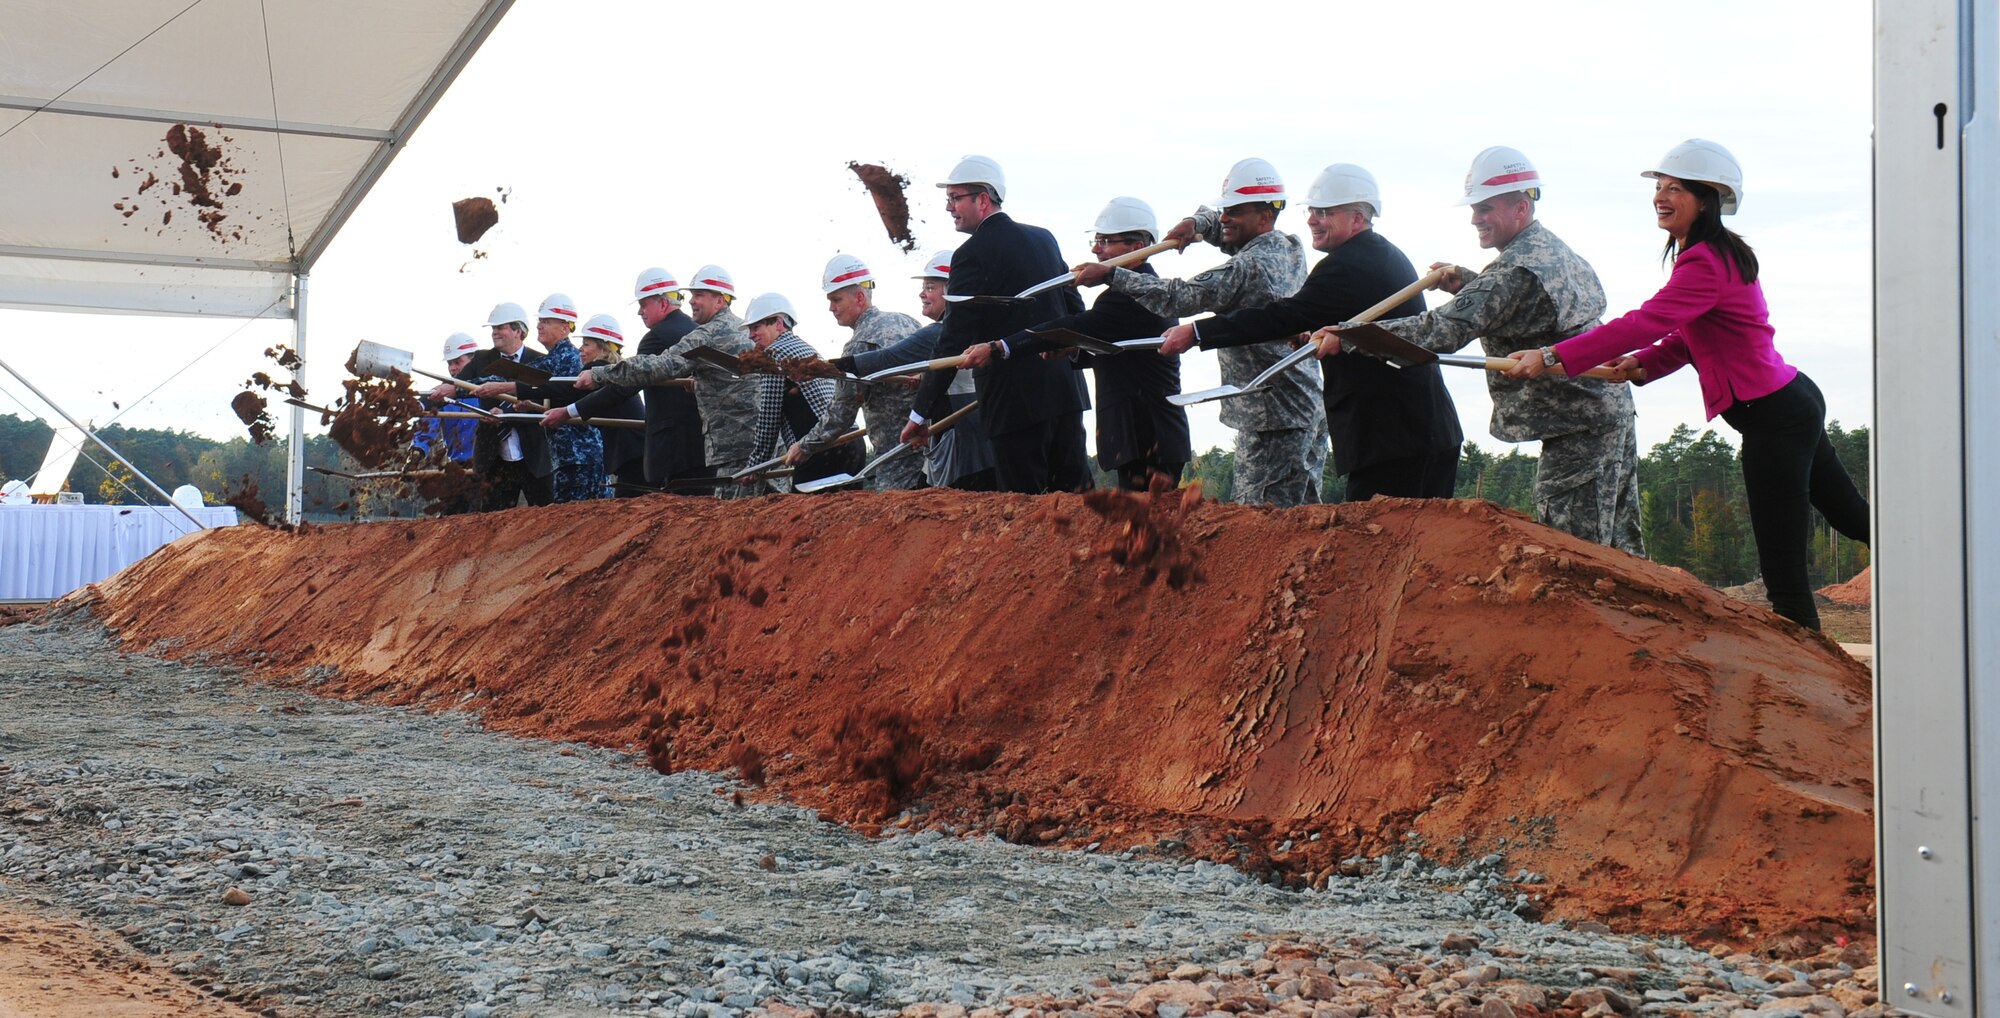 Senior U.S. military leaders, German dignitaries and former wounded U.S. servicemembers turn the first shovels of earth Oct. 24. 2014, to mark the start of construction of the Rhine Ordnance Barracks Medical Center Replacement that will replace Landstuhl Regional Medical Center and the Ramstein Air Base Clinic. (U.S. Army Photo/Sgt. Daniel Cole)